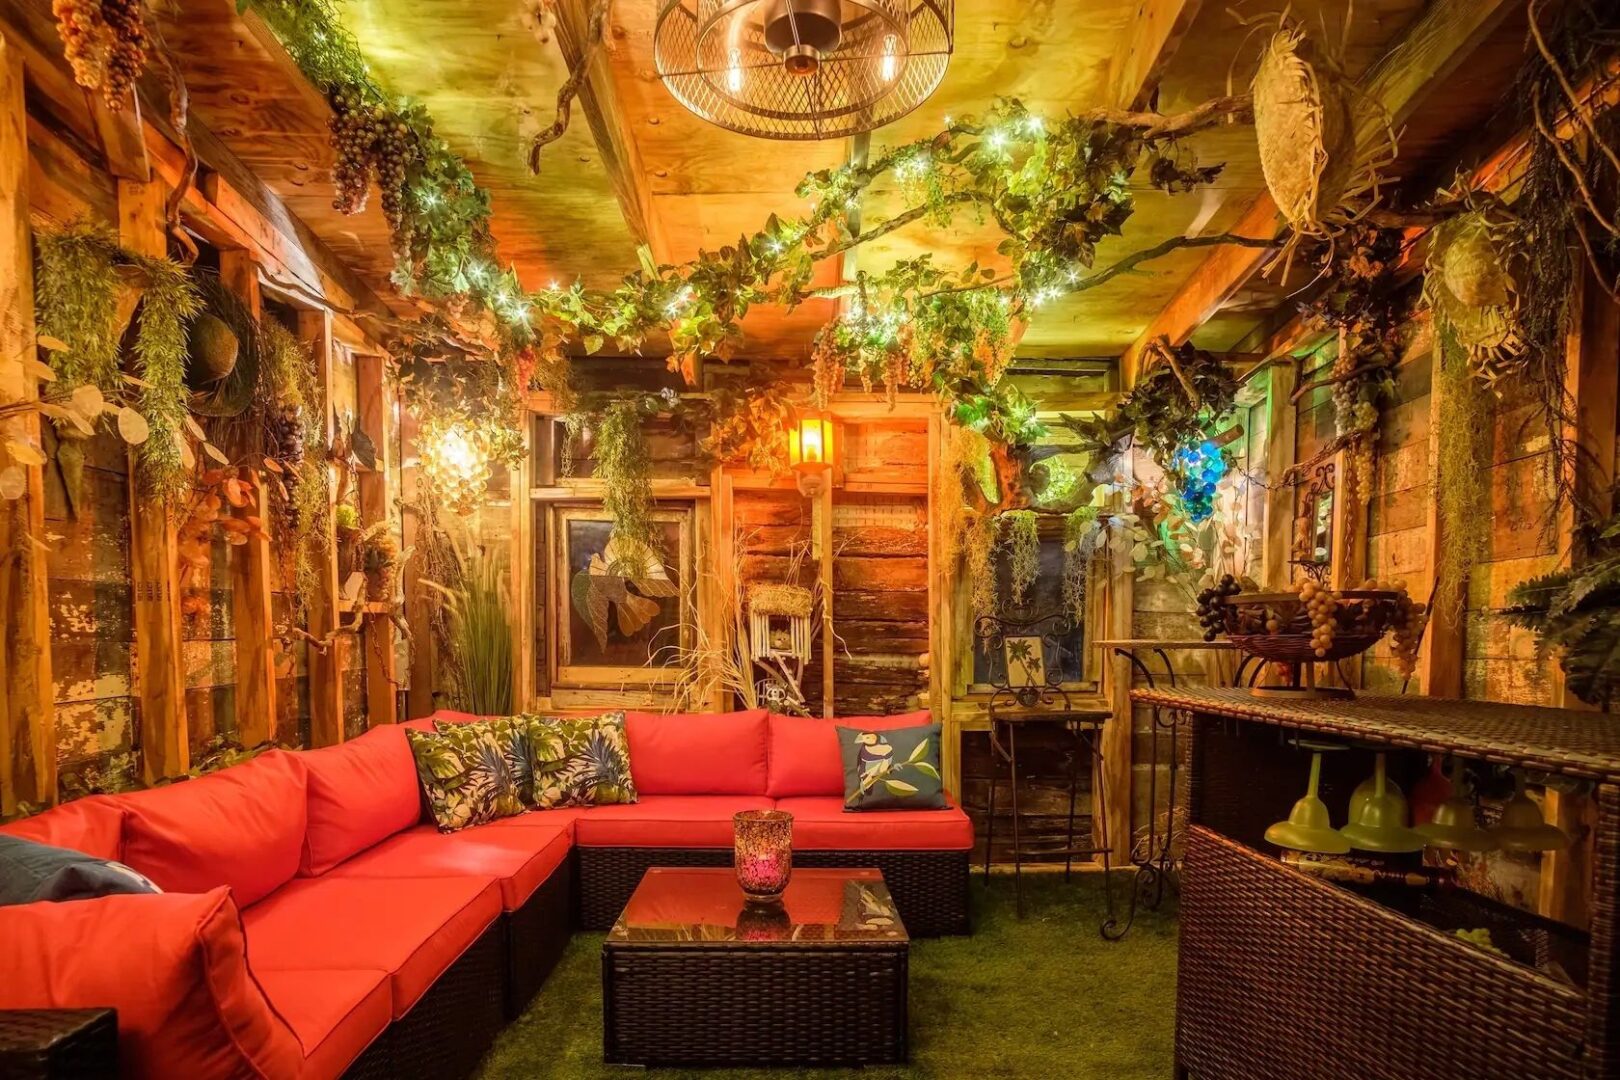 A room with red couches and green walls